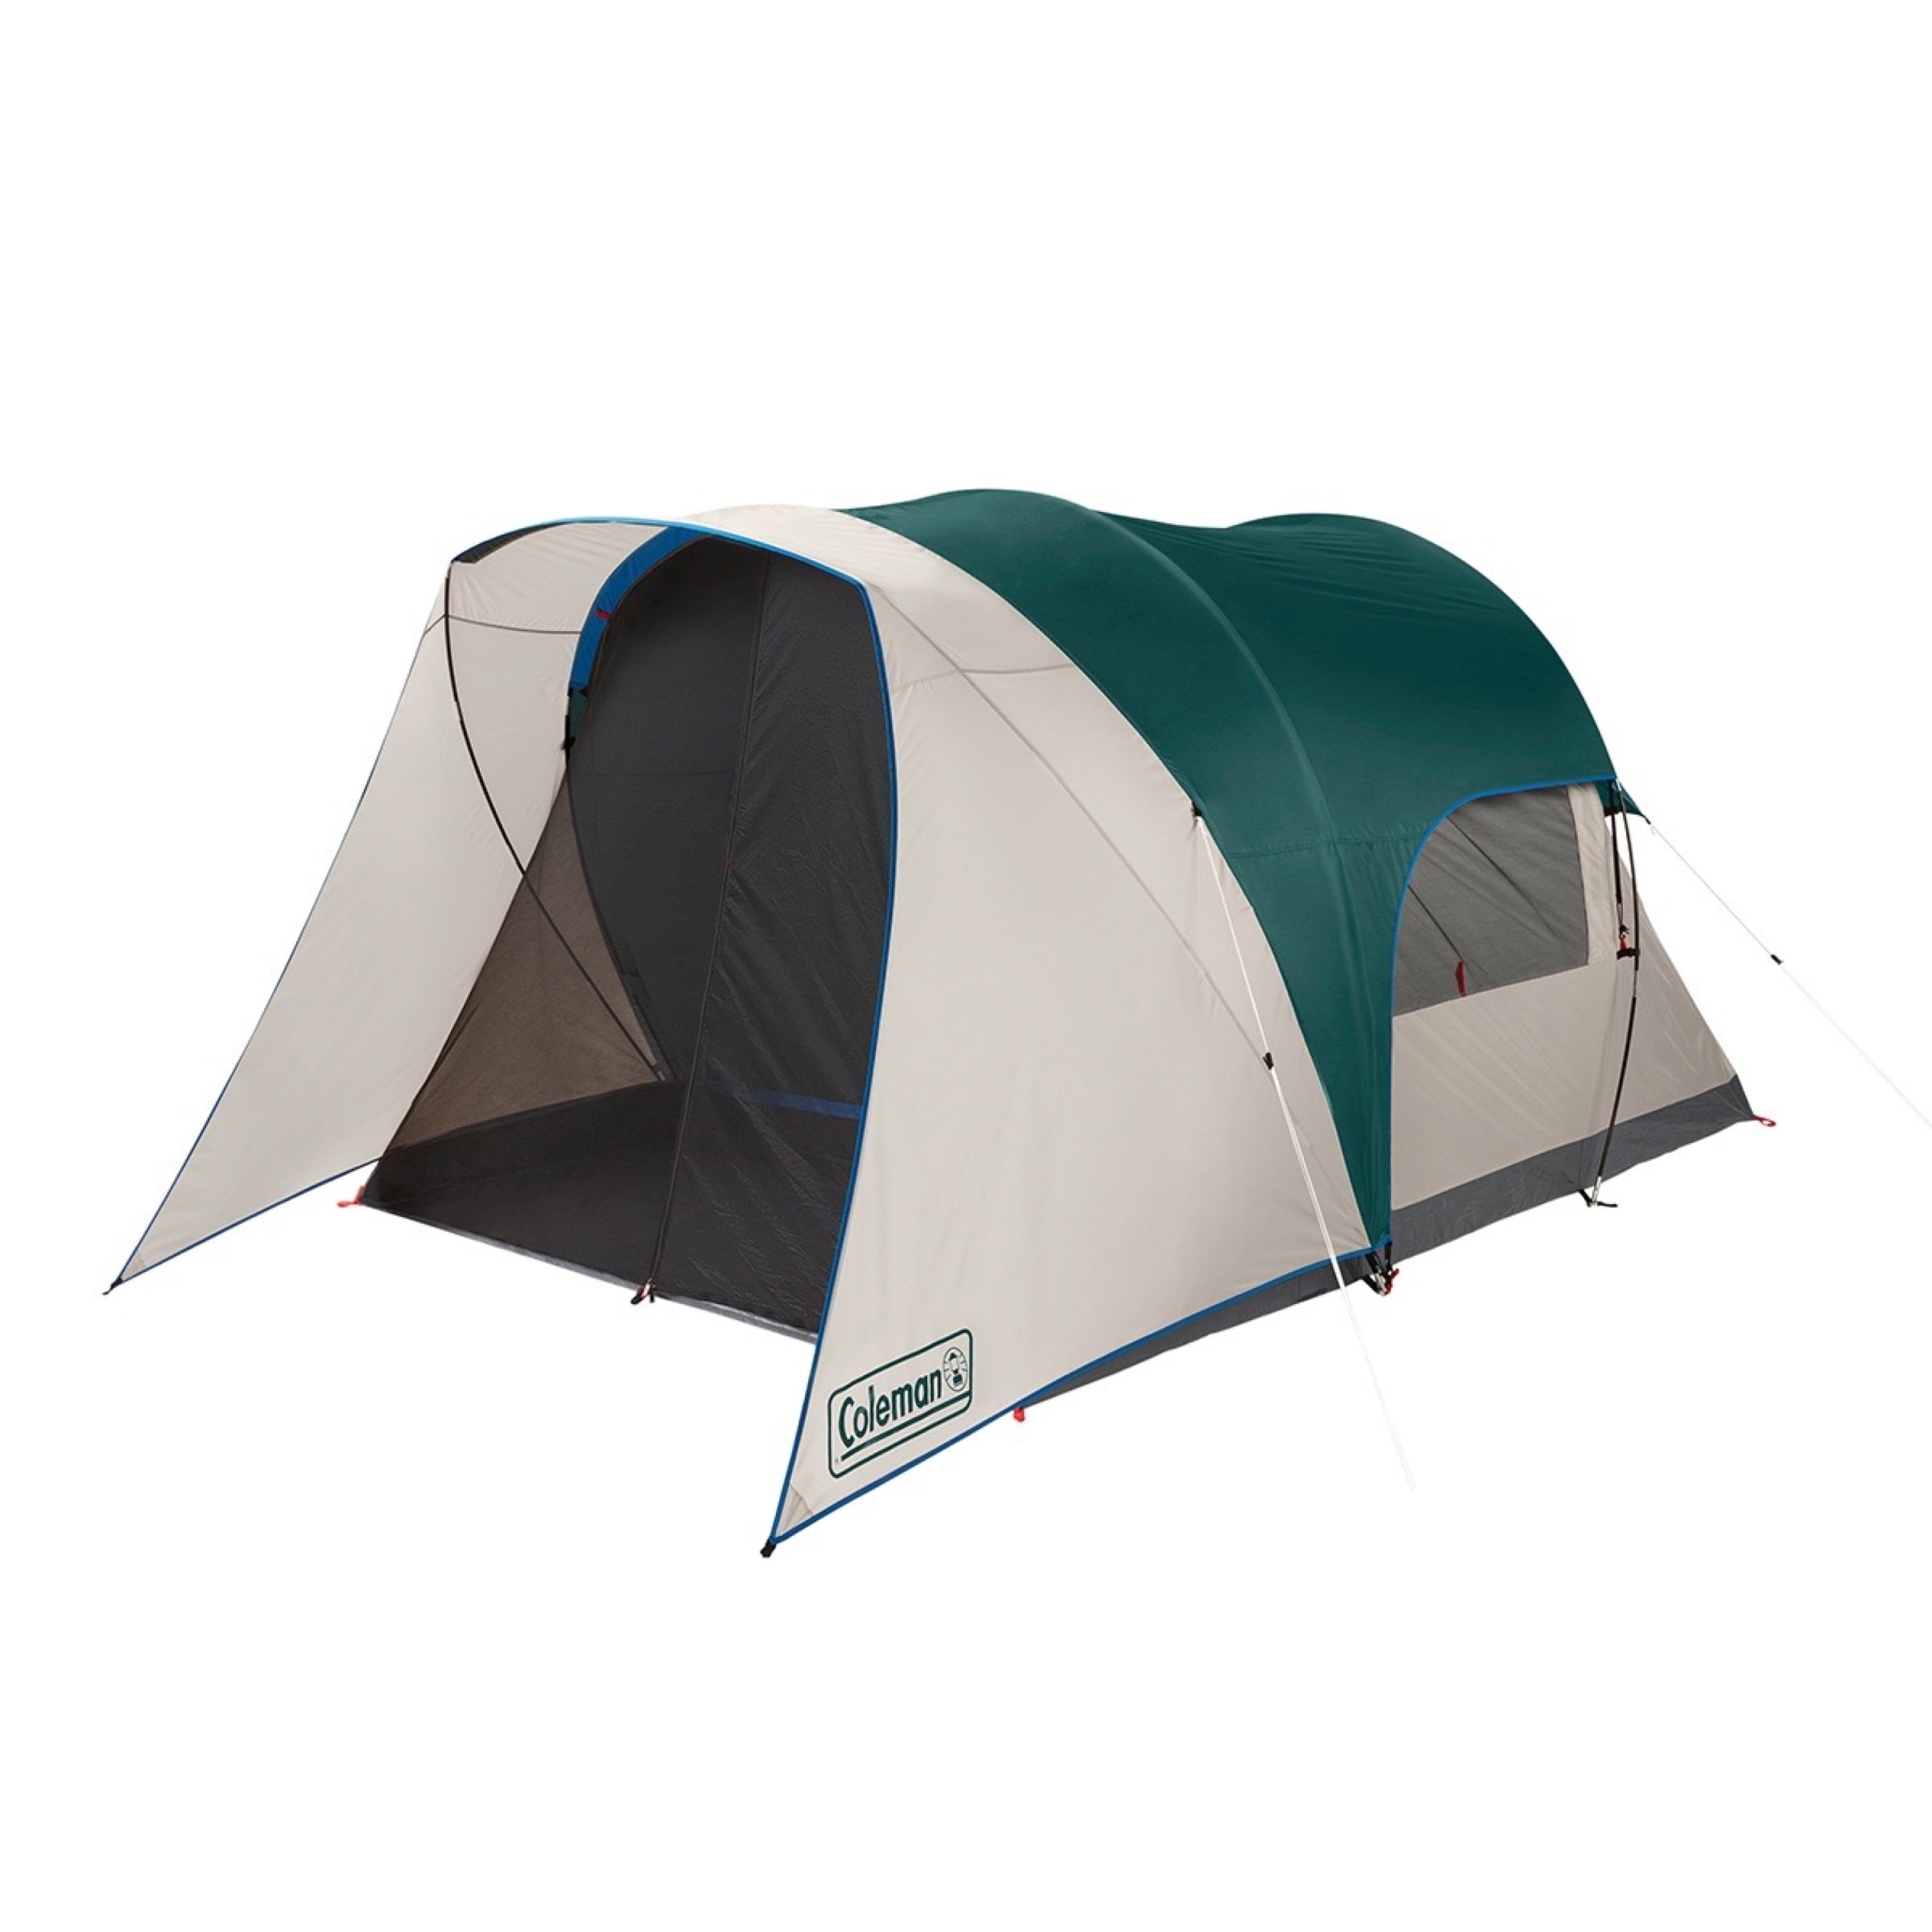 2 Persons Camping Tent Double Layer Ultralight Backpacking Tent 